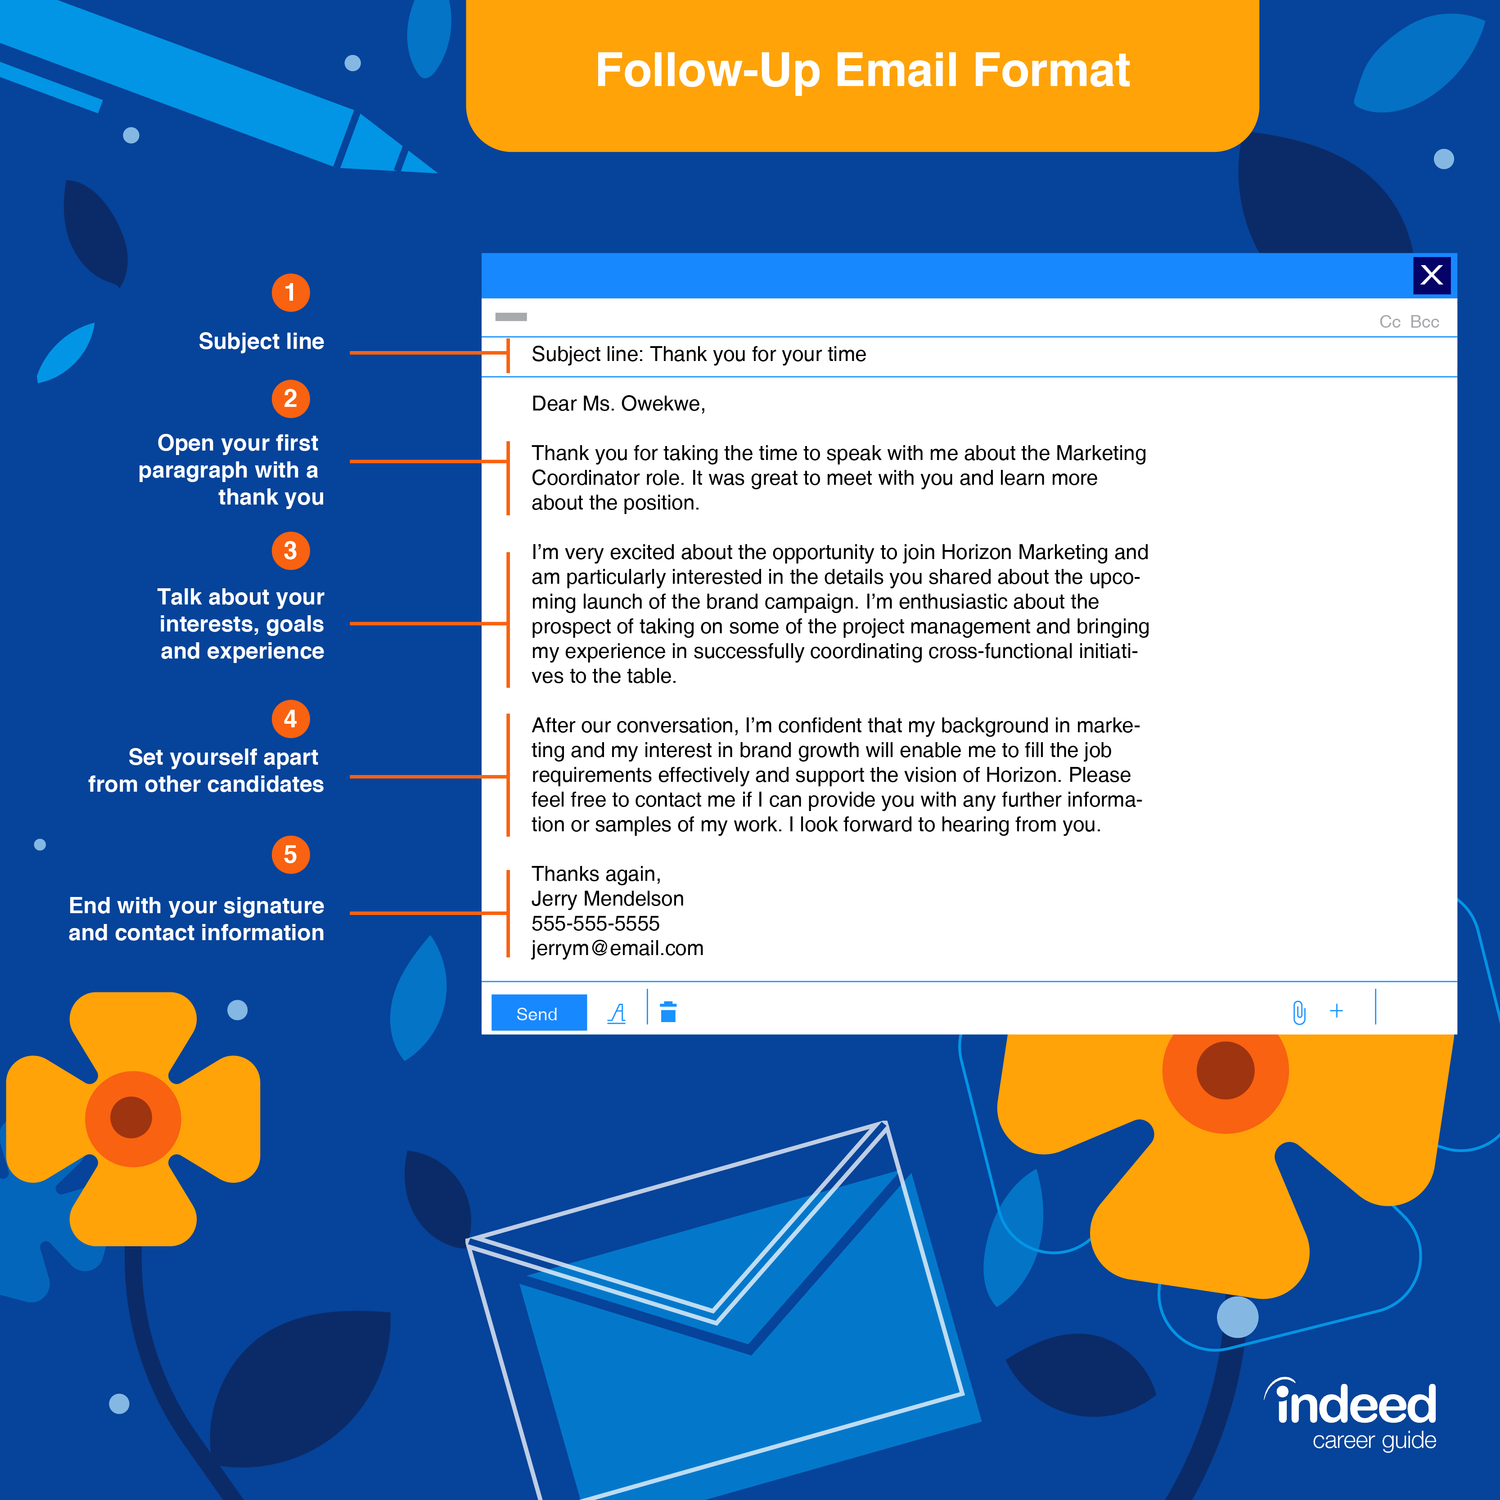 Follow-up Email Format